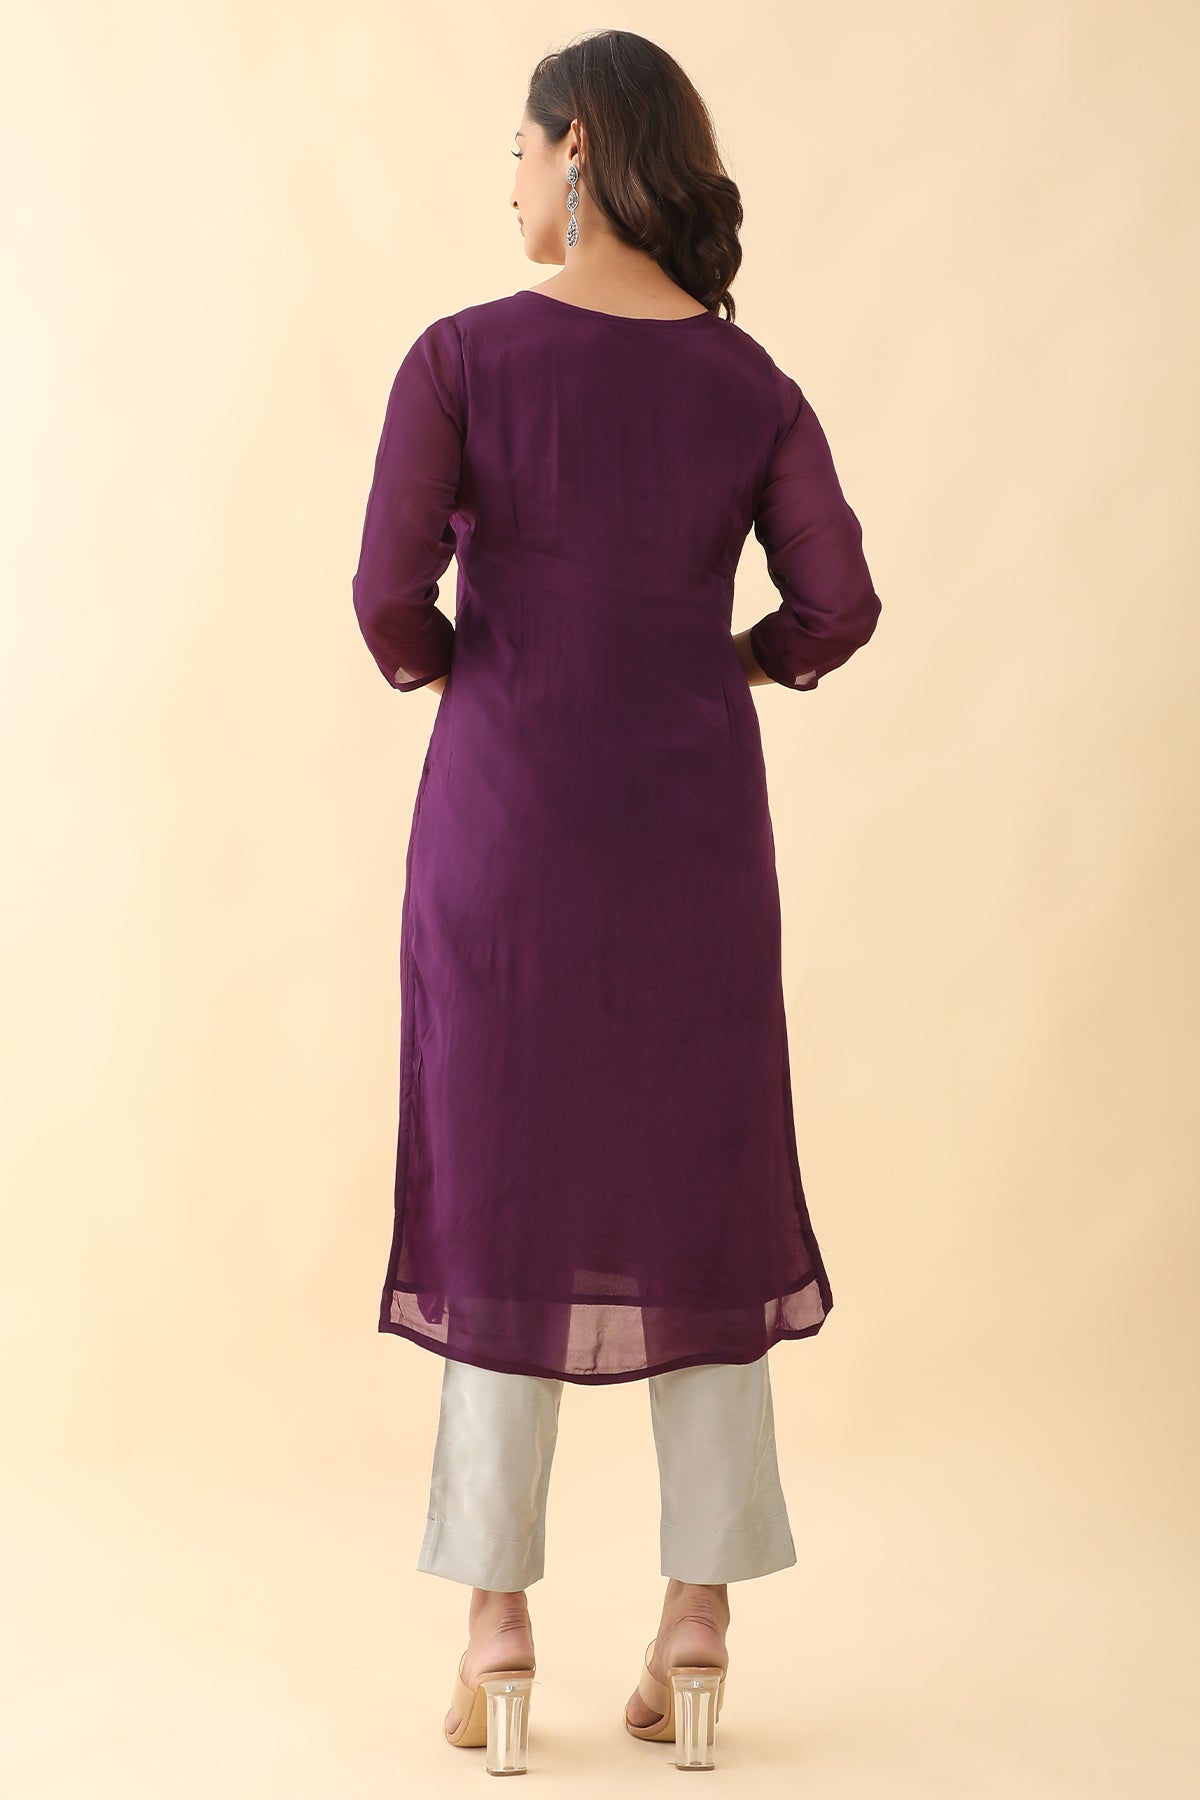 All Over Floral Embroidered With Foil Mirror Embellished Kurta Purple